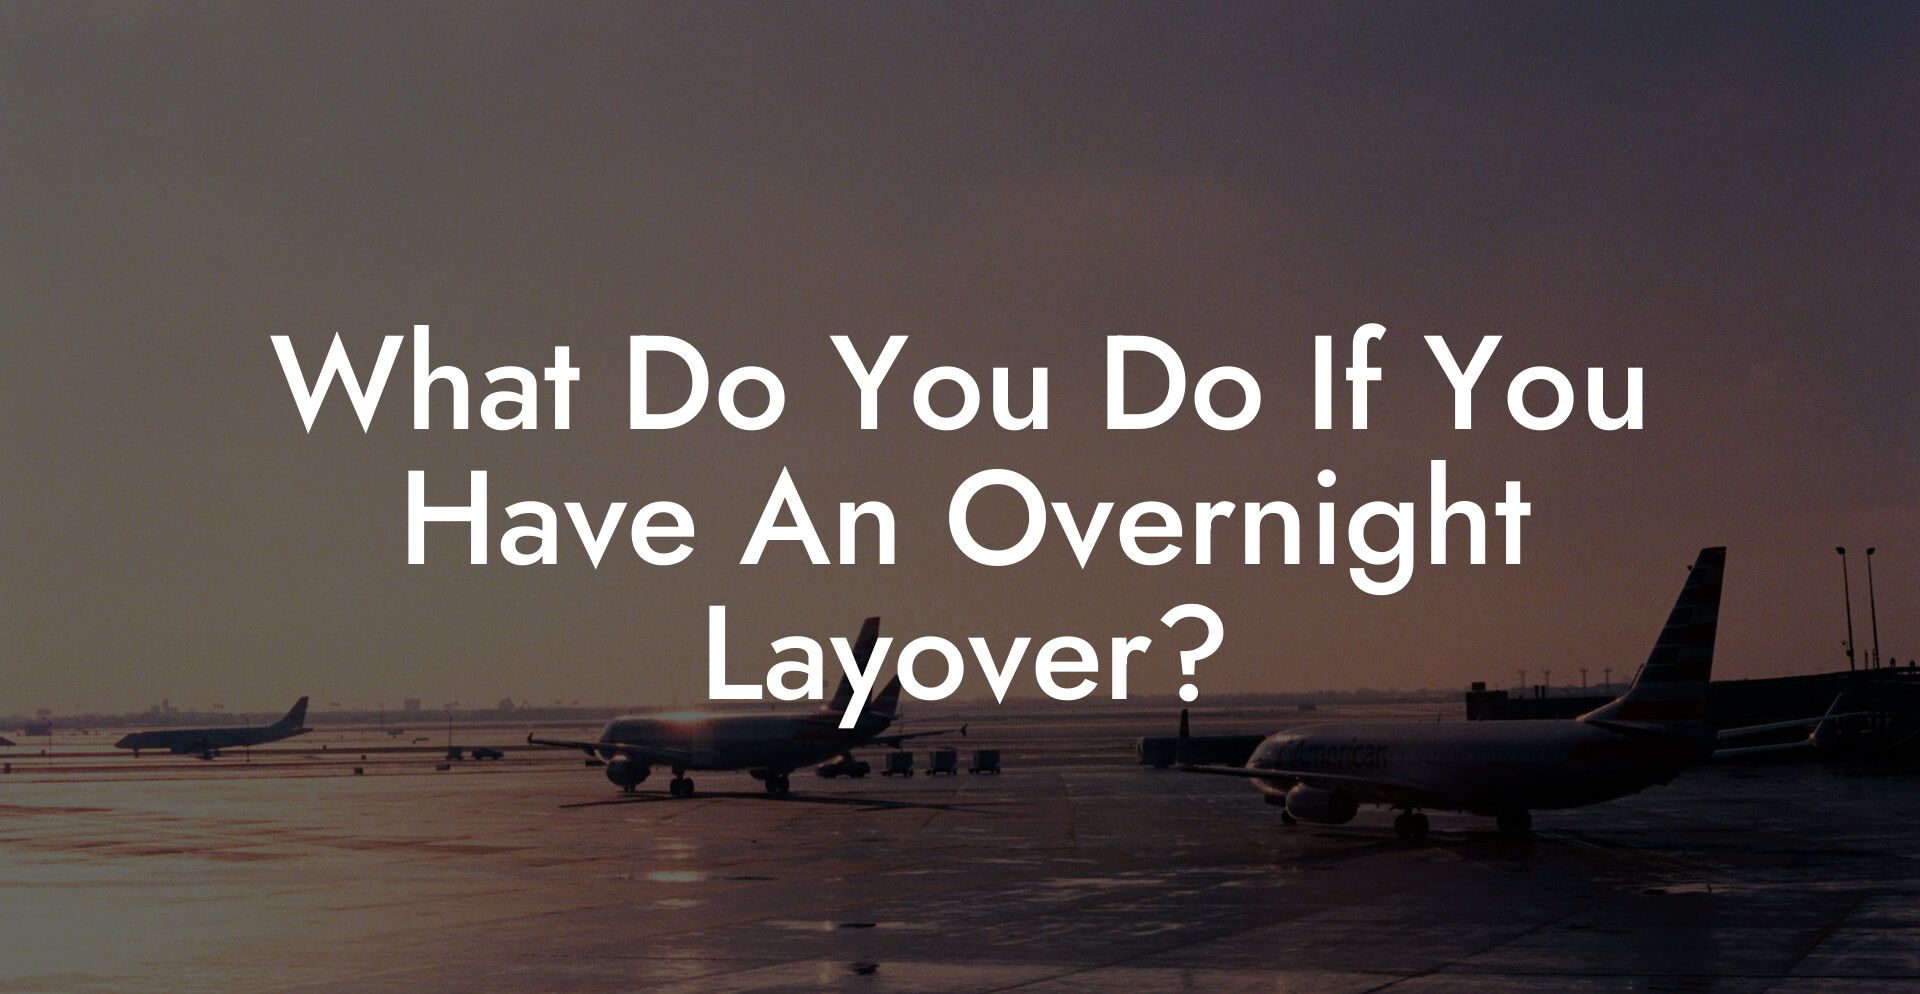 What Do You Do If You Have An Overnight Layover?